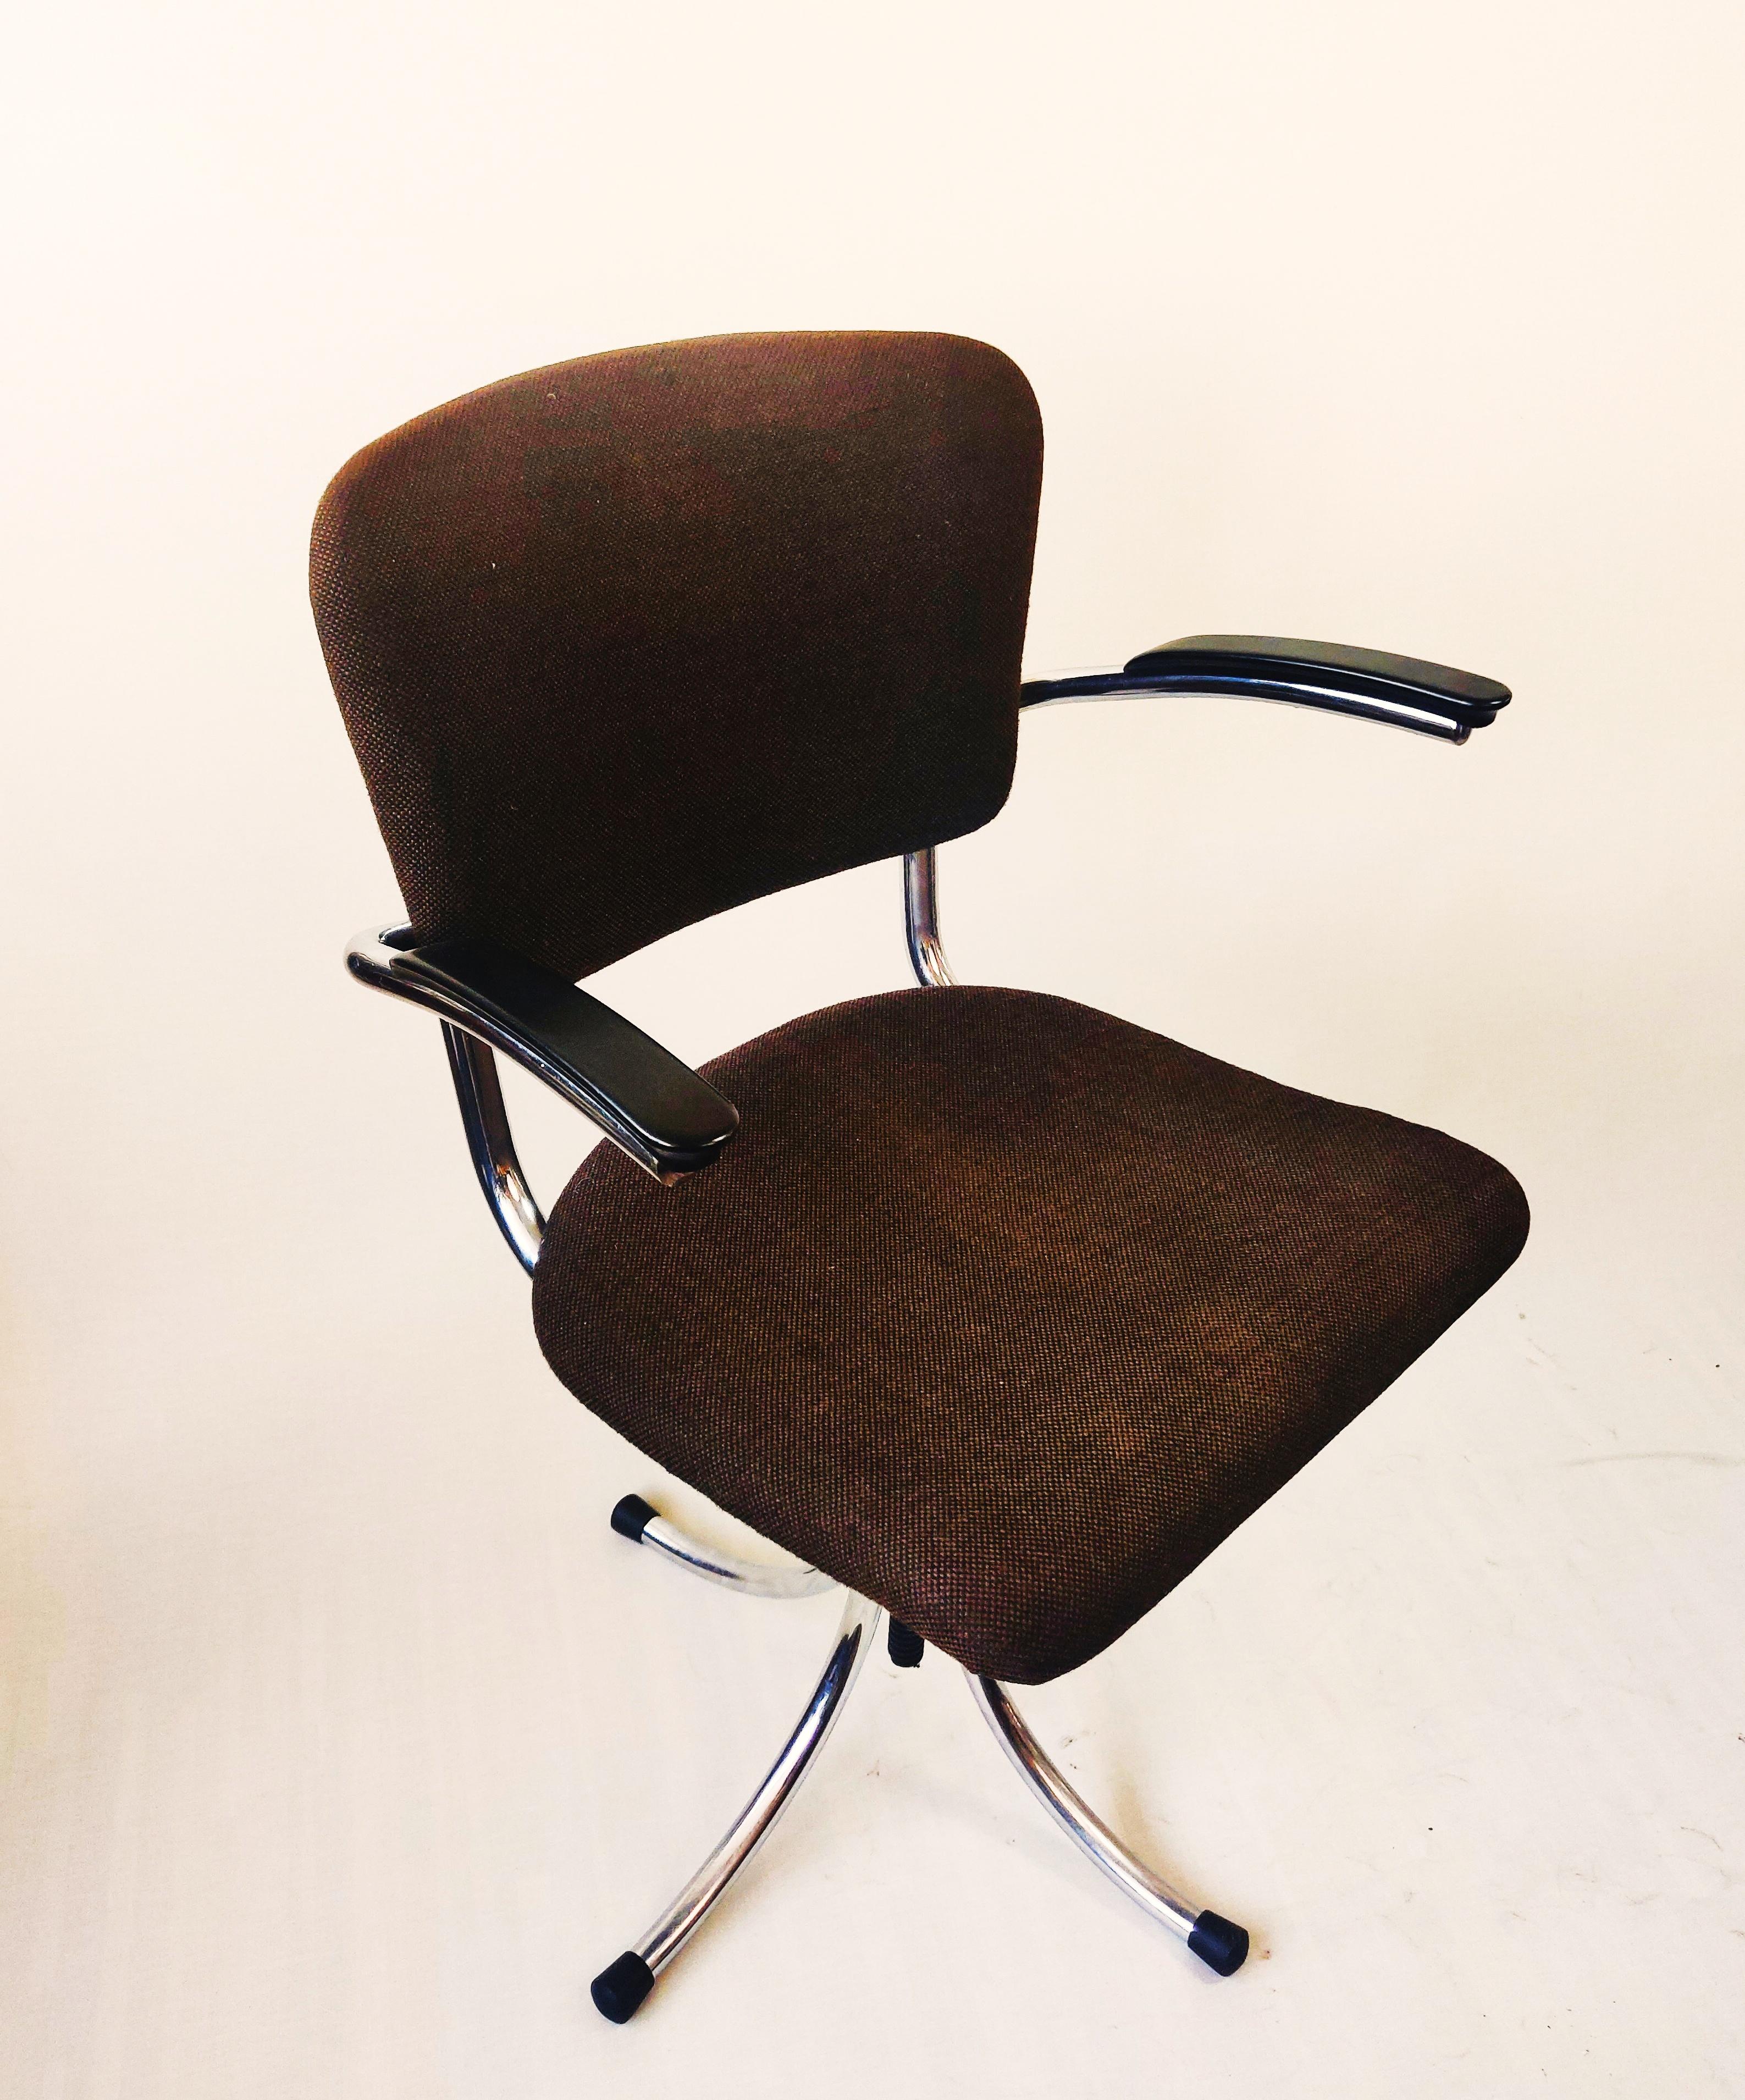 Dutch Chair by Paul Schuitema for Fana, Rotterdam, 1960s For Sale